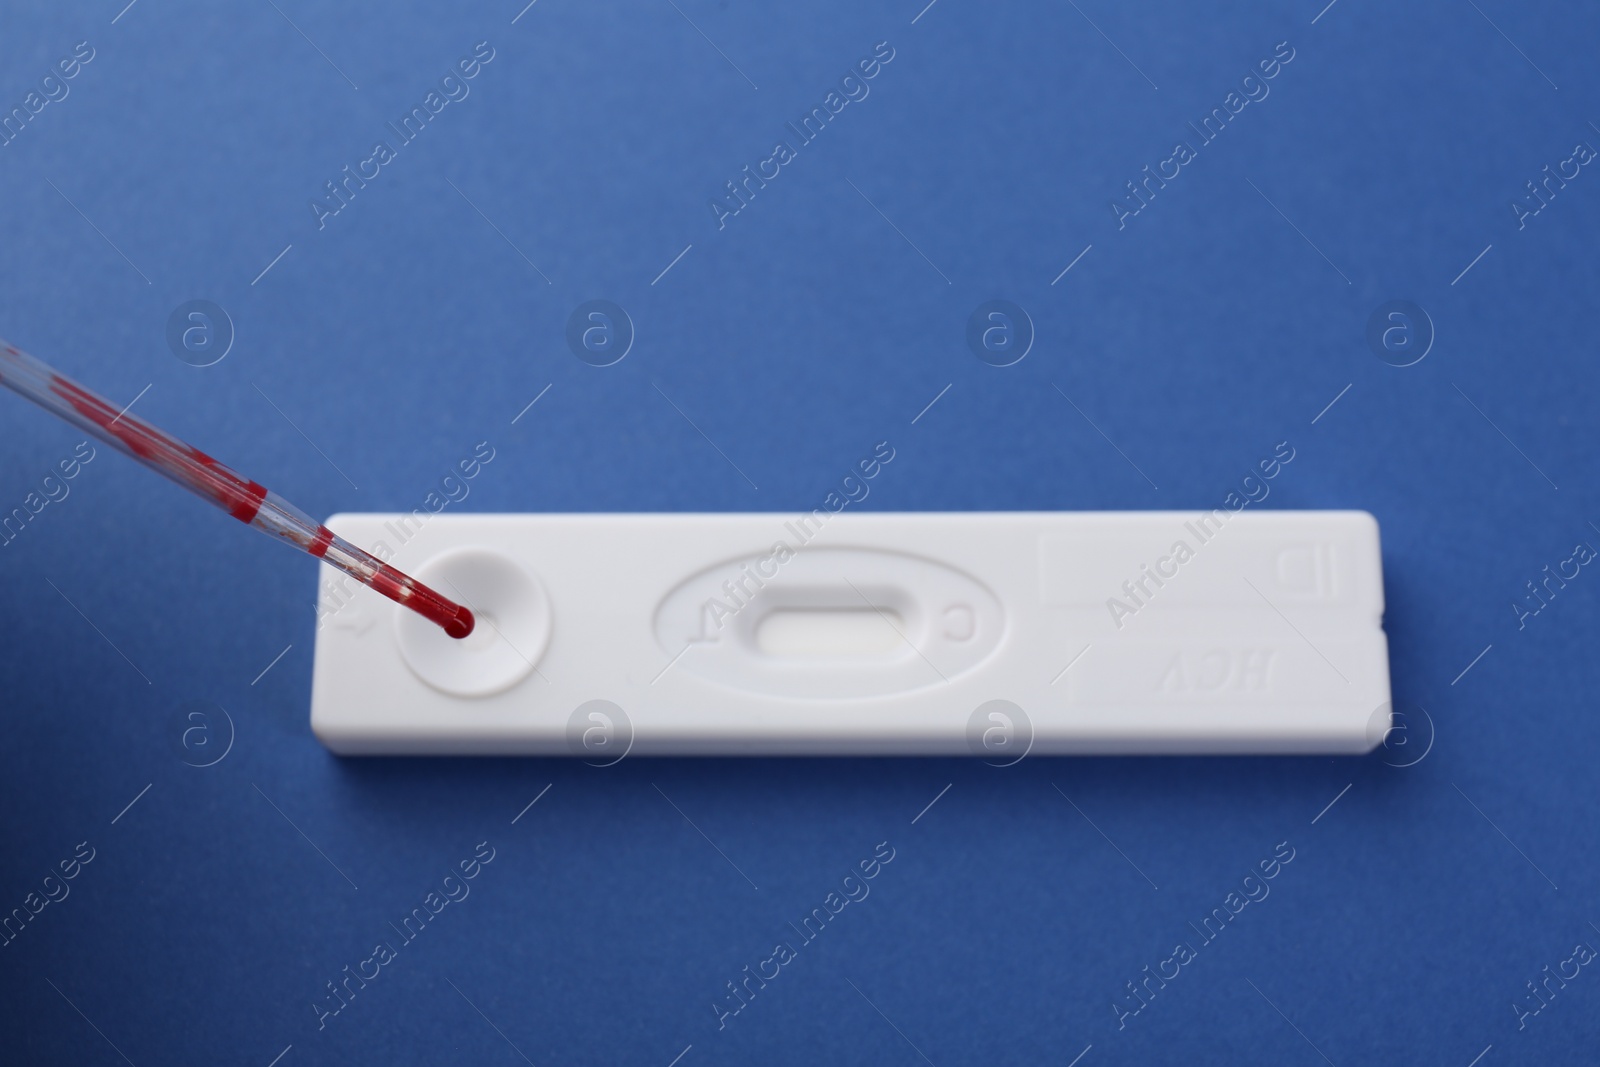 Photo of Dropping blood sample onto disposable express test cassette with pipette on blue background, above view